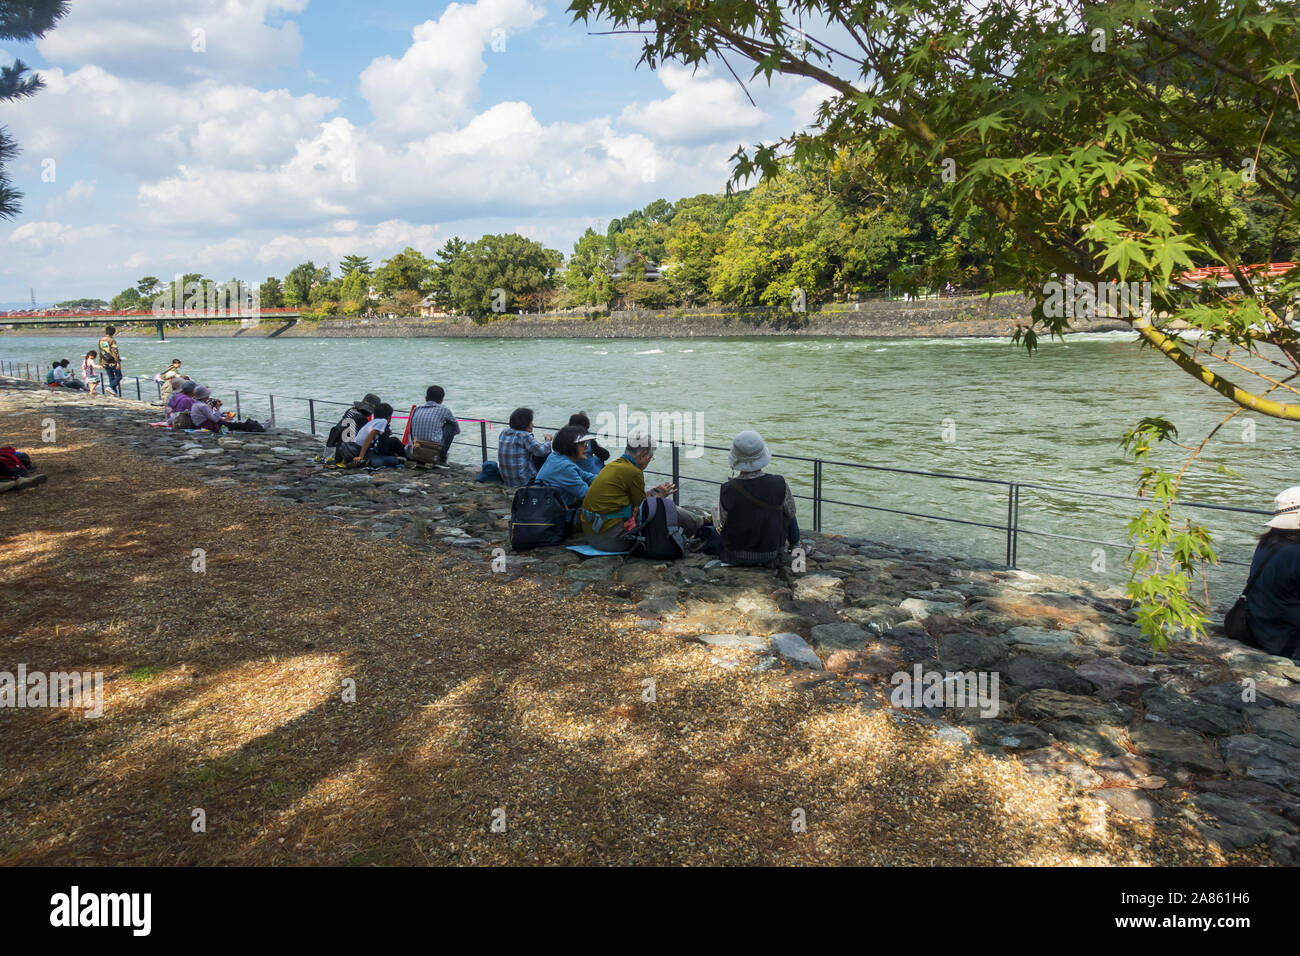 Uji, Japan - Elderly people sitting next to the River on a sunny Autumn day Stock Photo